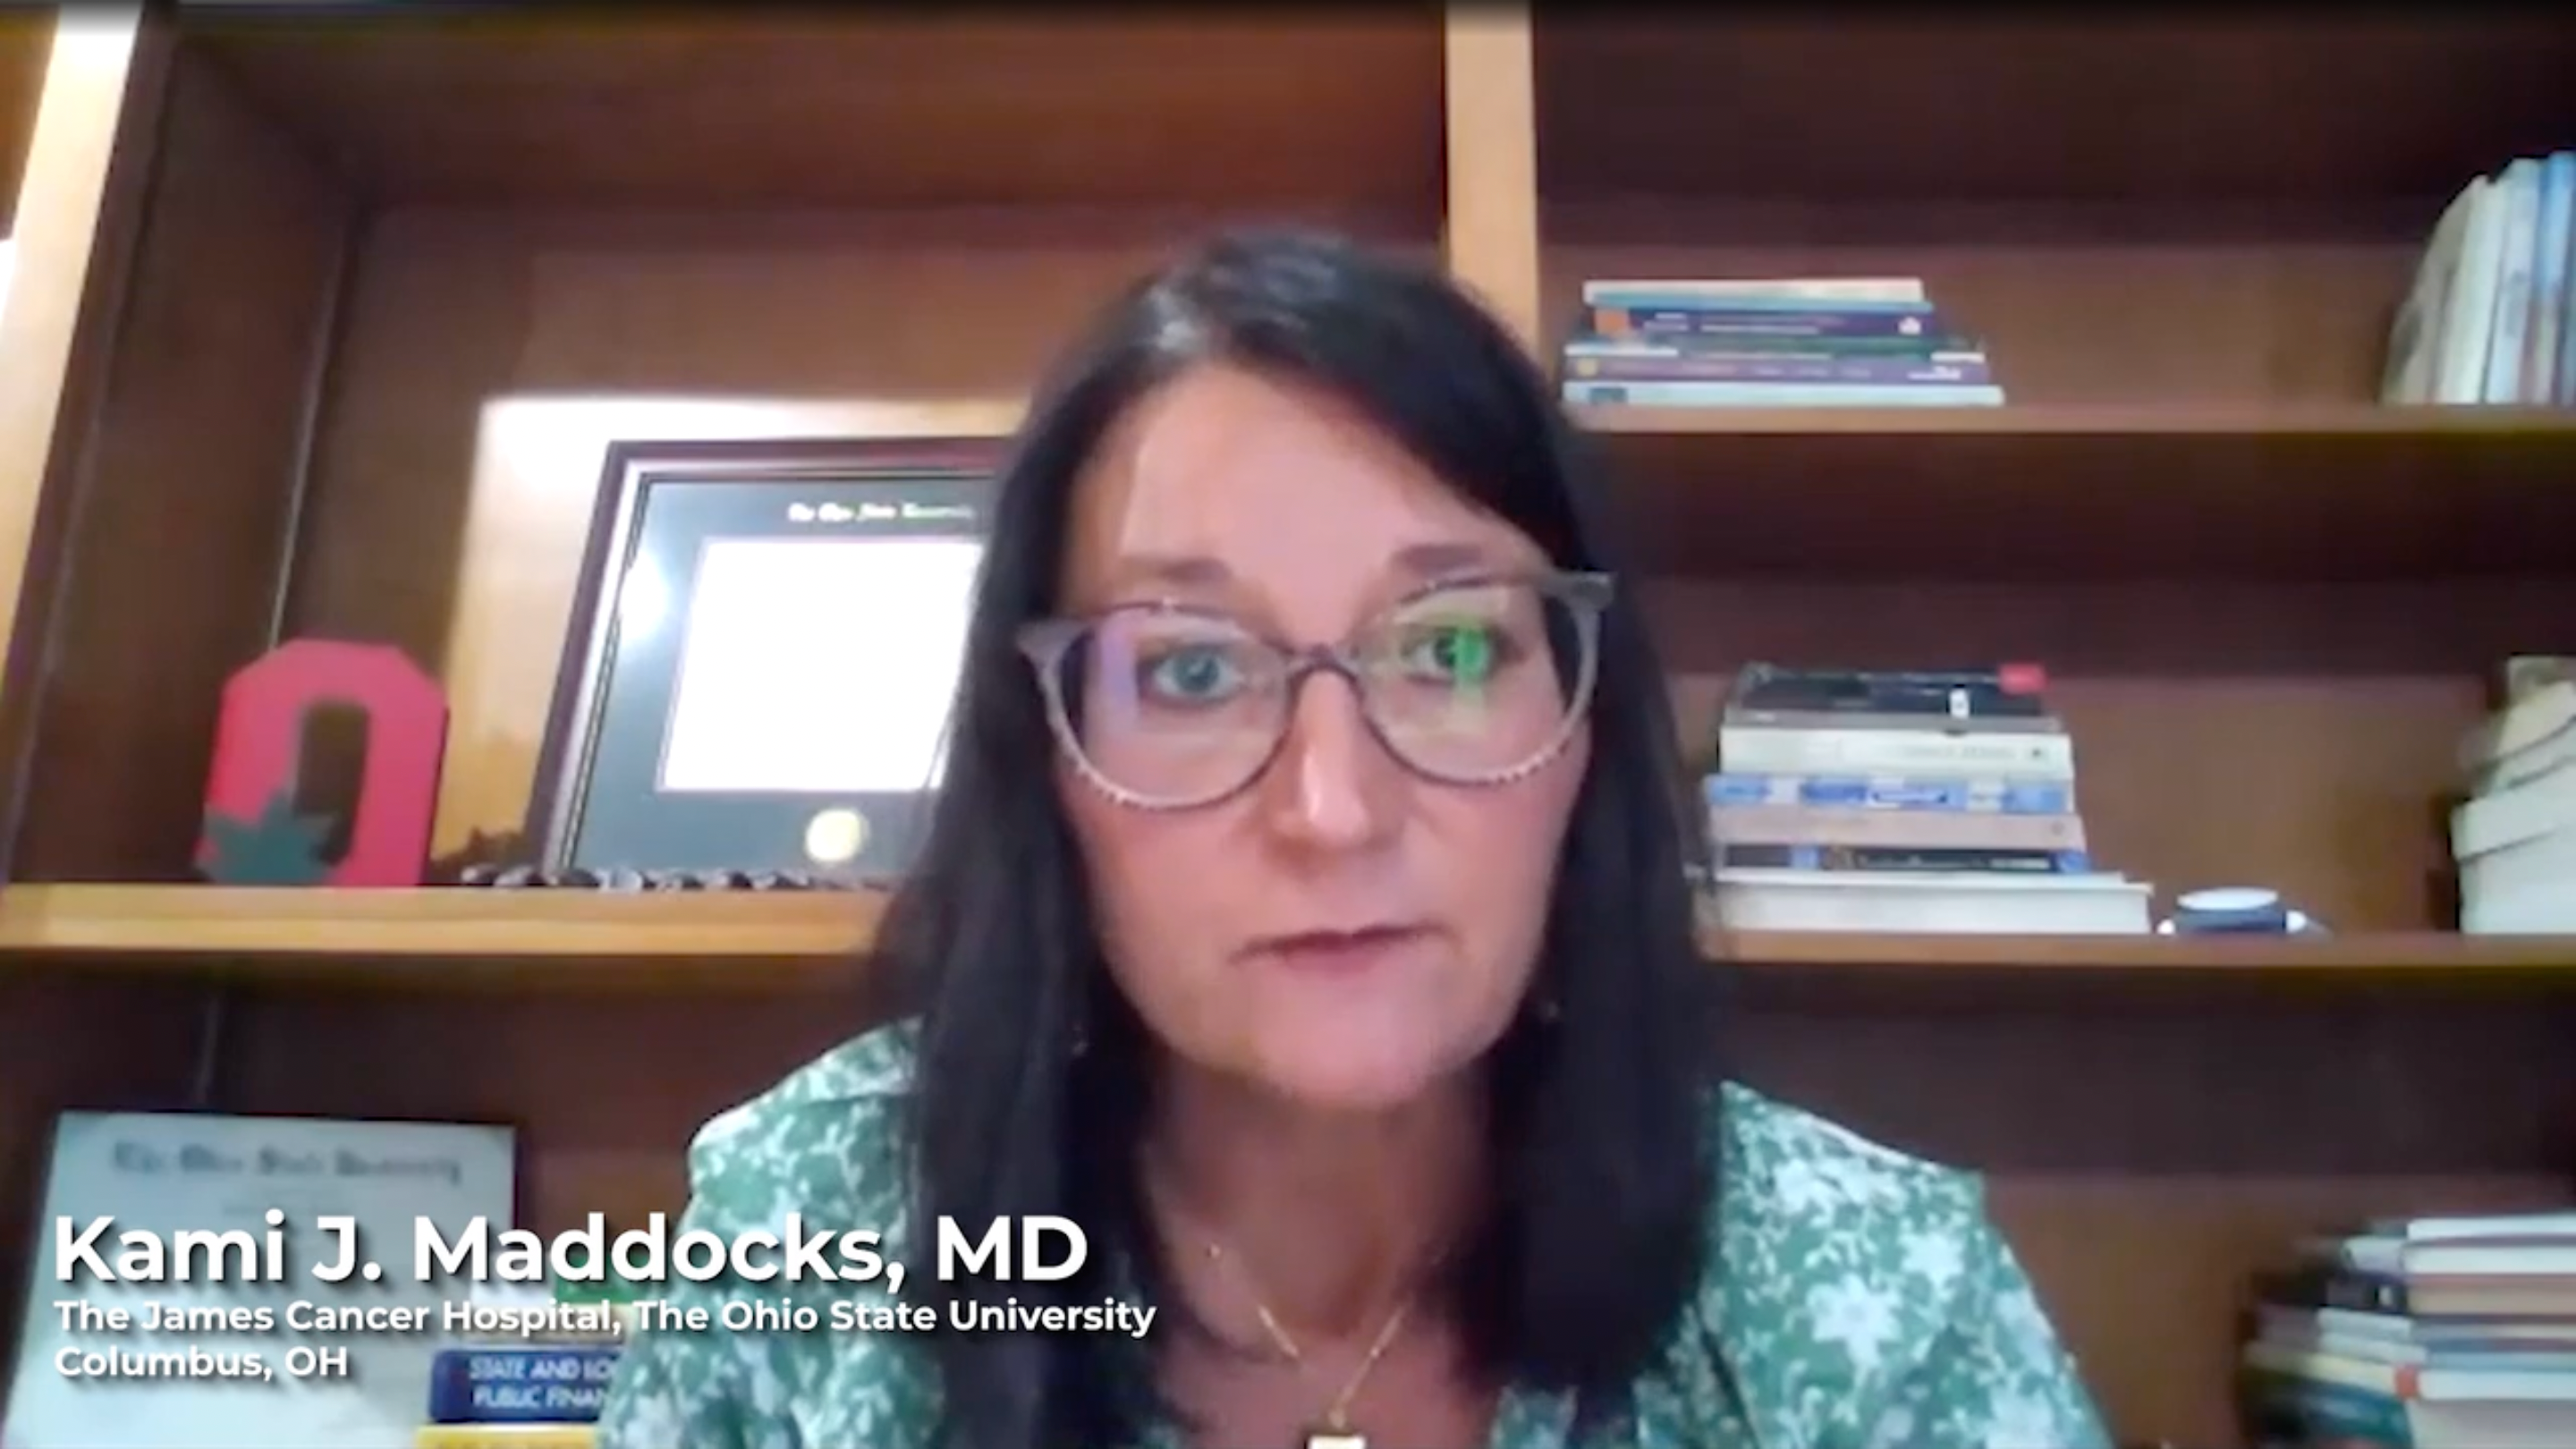 Kami J. Maddocks, MD, Reviews Ongoing Research Into Bispecific Antibodies and Other New Treatment Combinations for Lymphoma